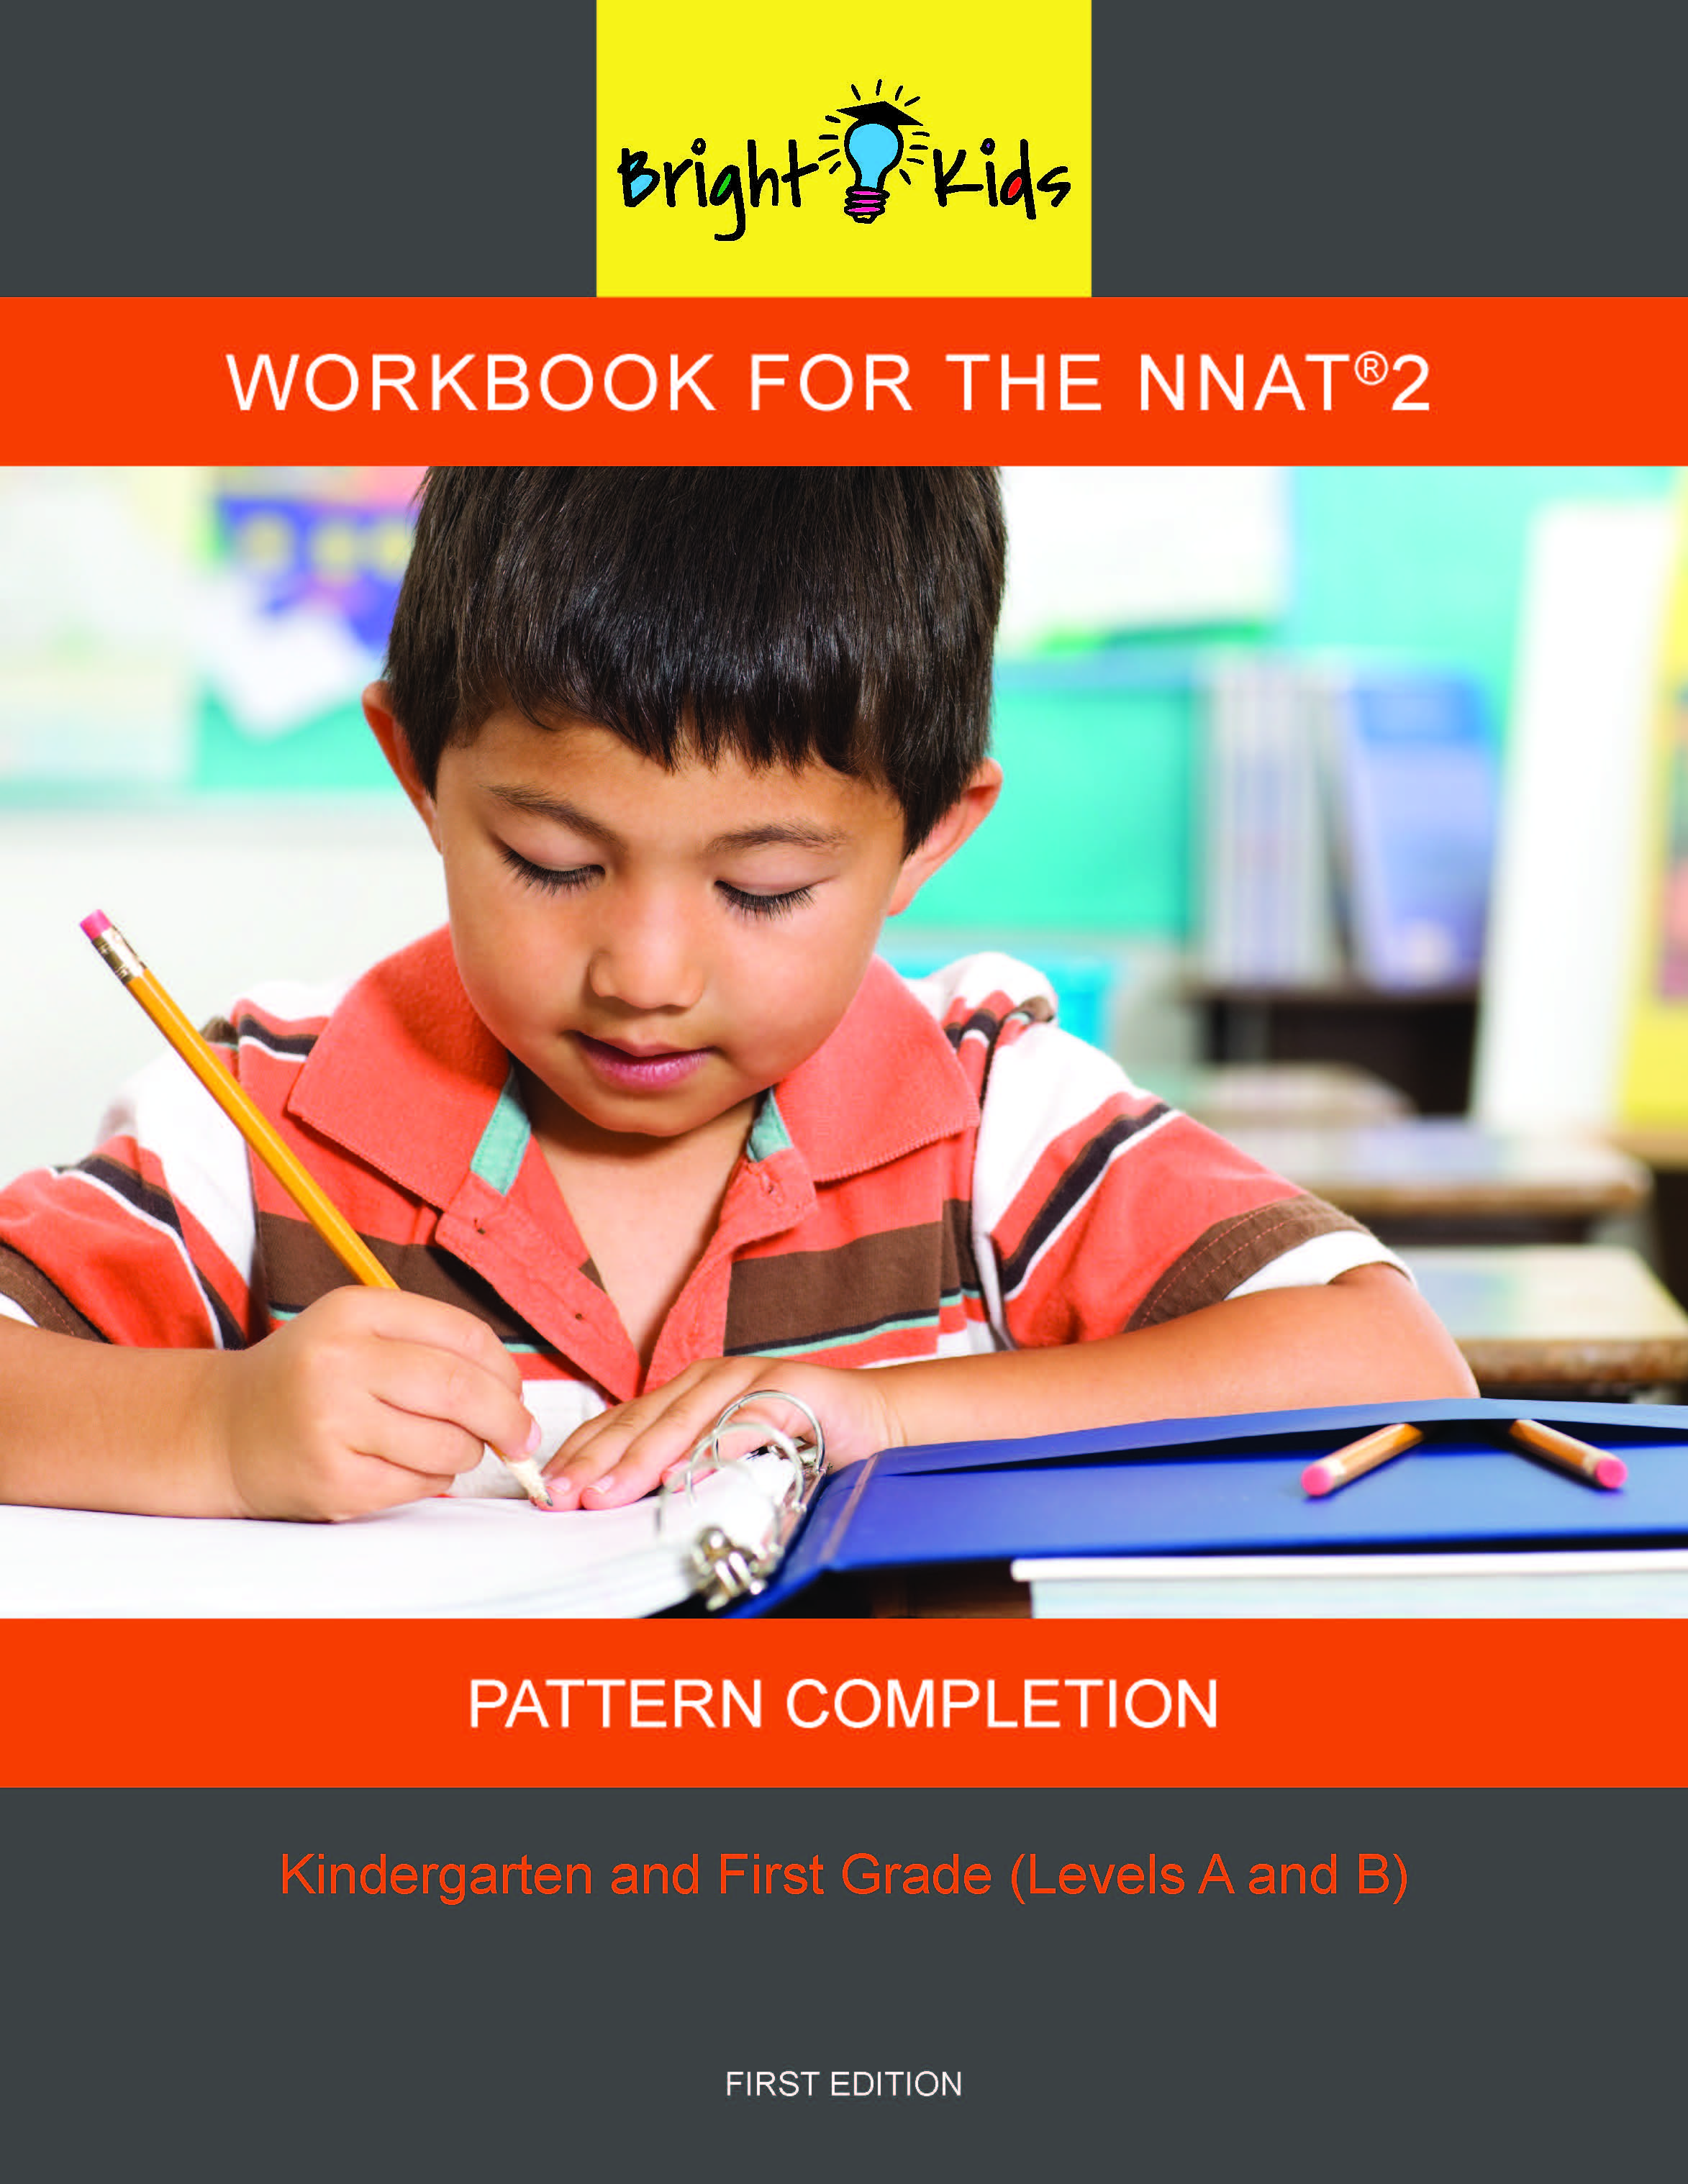 Bright Kids Pattern Completion Workbook for the NNAT2